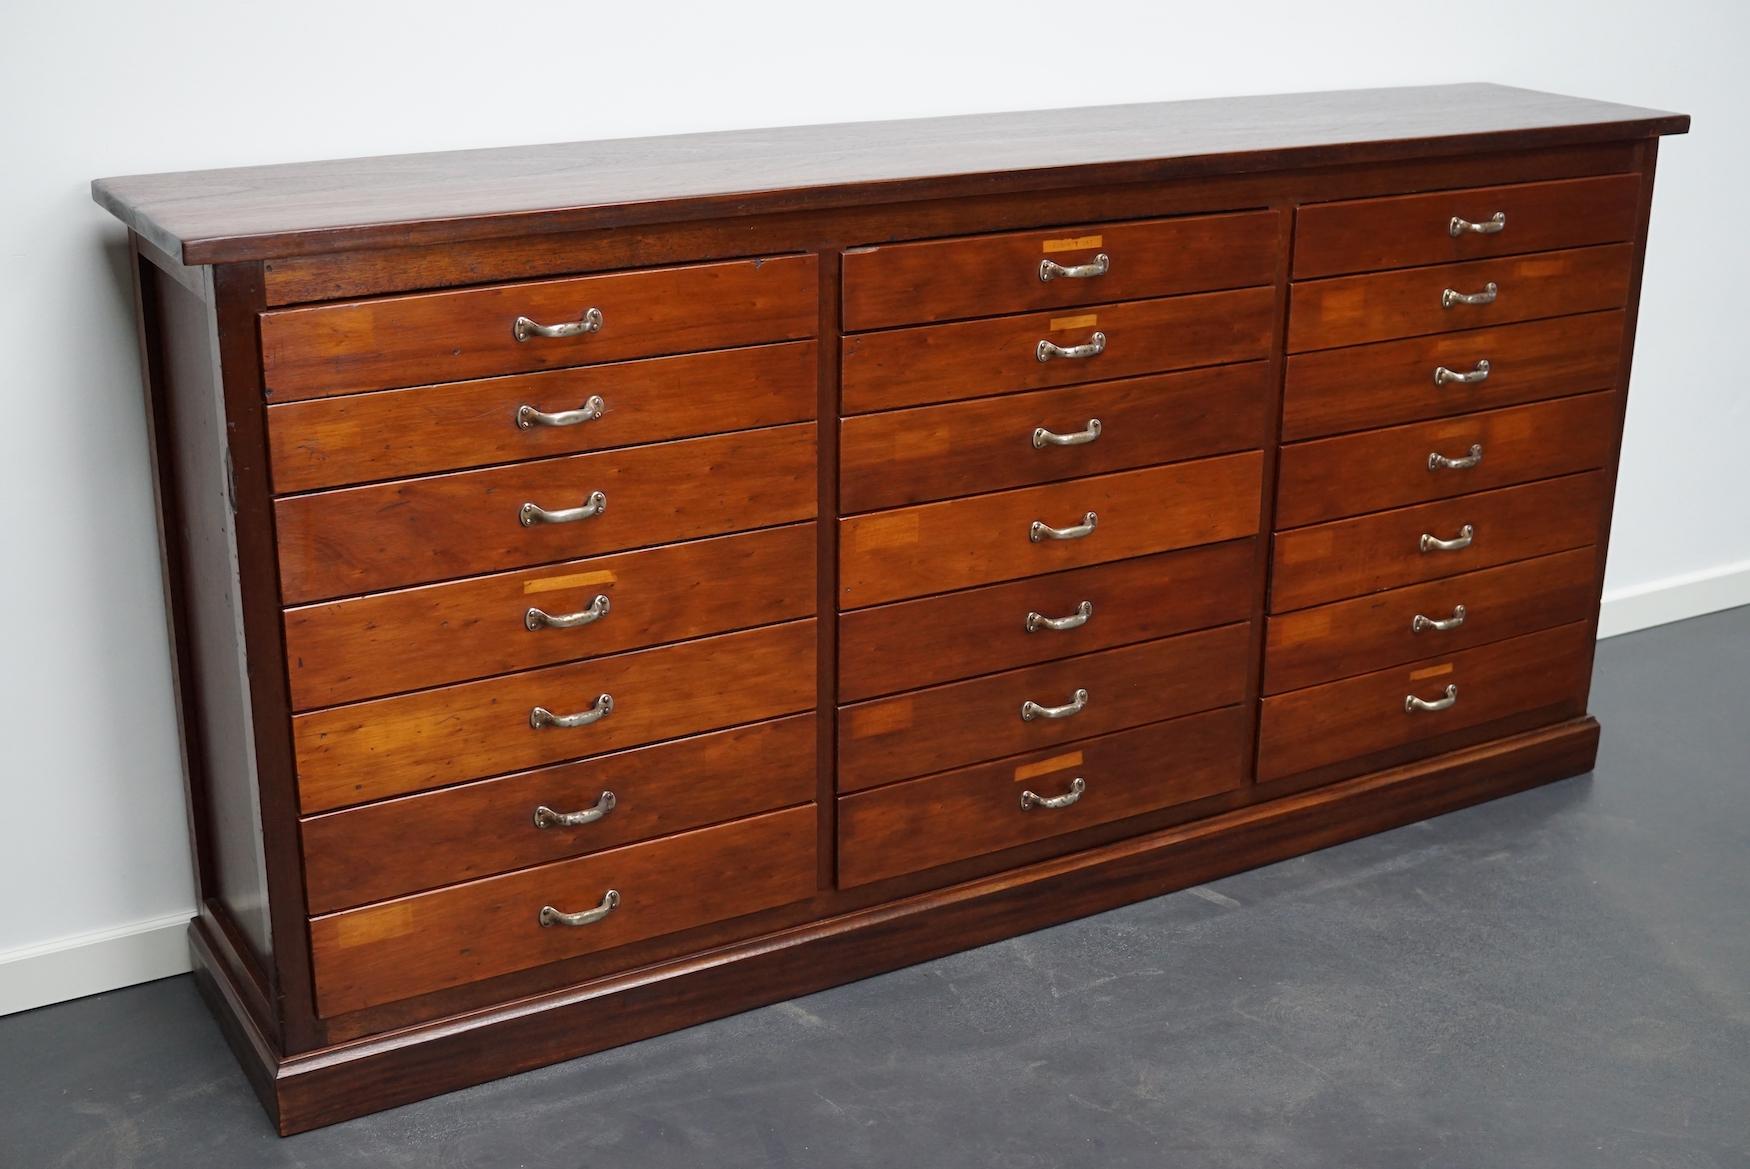 This vintage mahogany bank of drawers dates from the 1930s and was made in England. It features a mahogany frame, top and drawer fronts with metal handles. The interior dimensions of the drawers are: D x W x H 29 x 51 x 5 and 7 cm. We have two